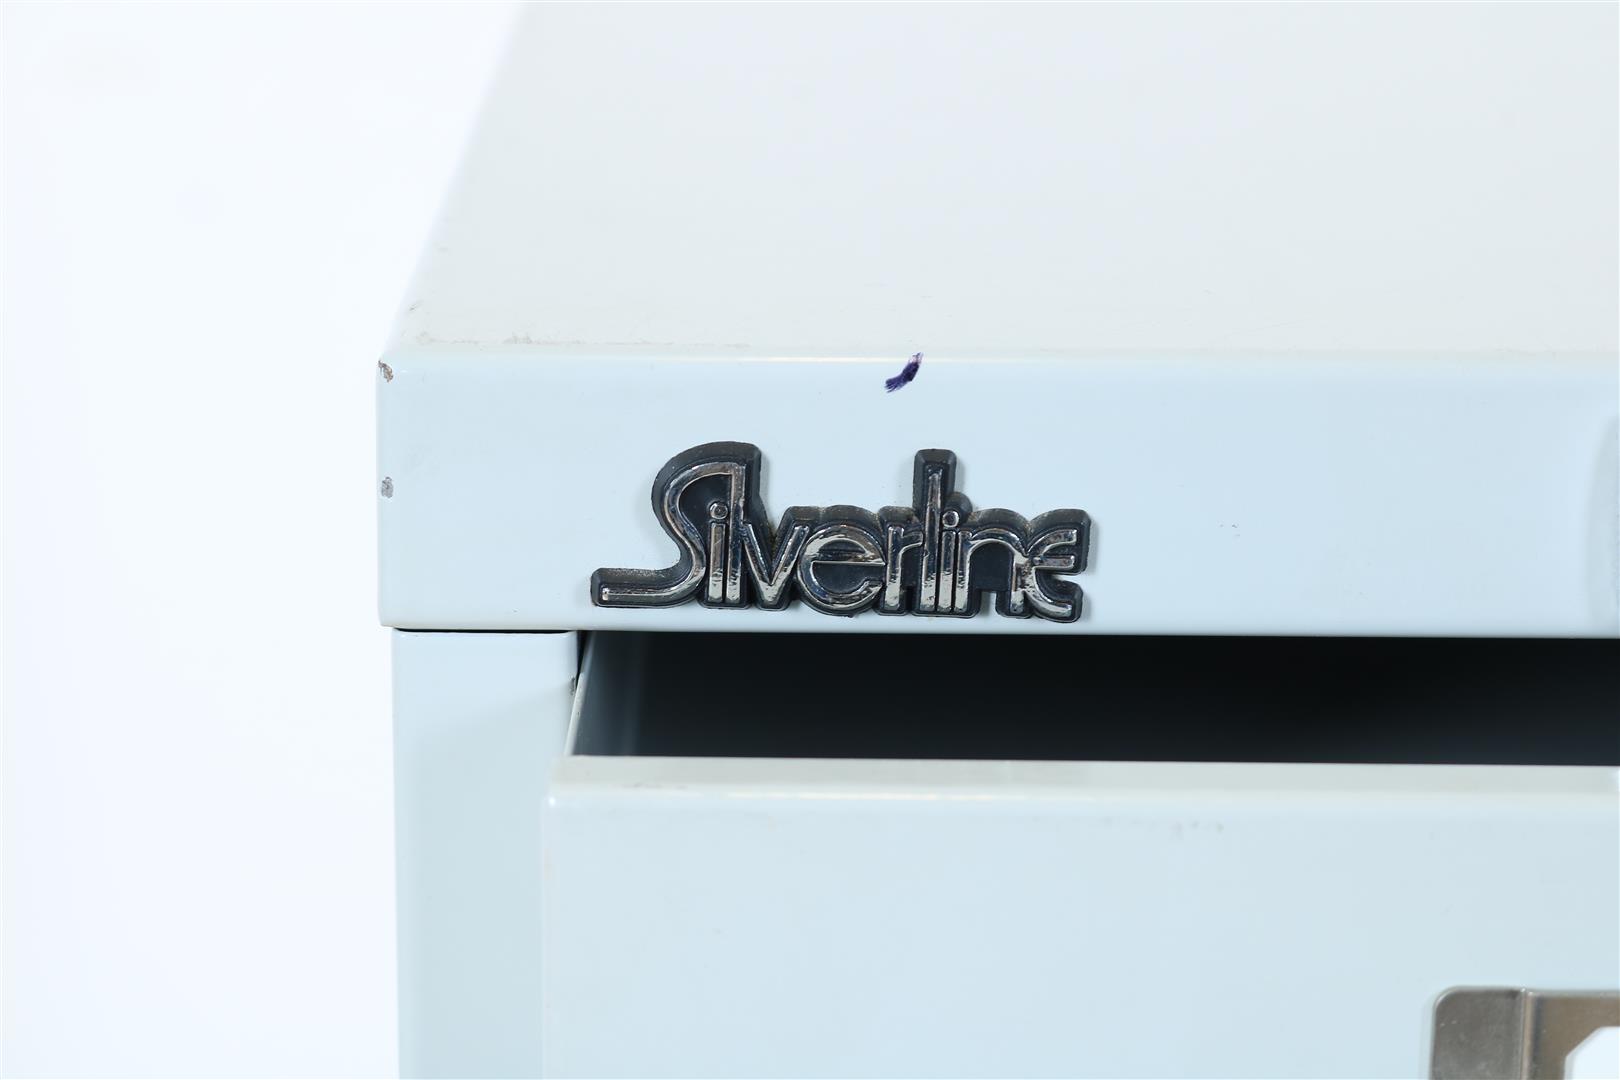 Metal filing cabinet with 15 drawers, Silverline label, 87 x 41 x 28 cm. (key missing) - Image 3 of 3